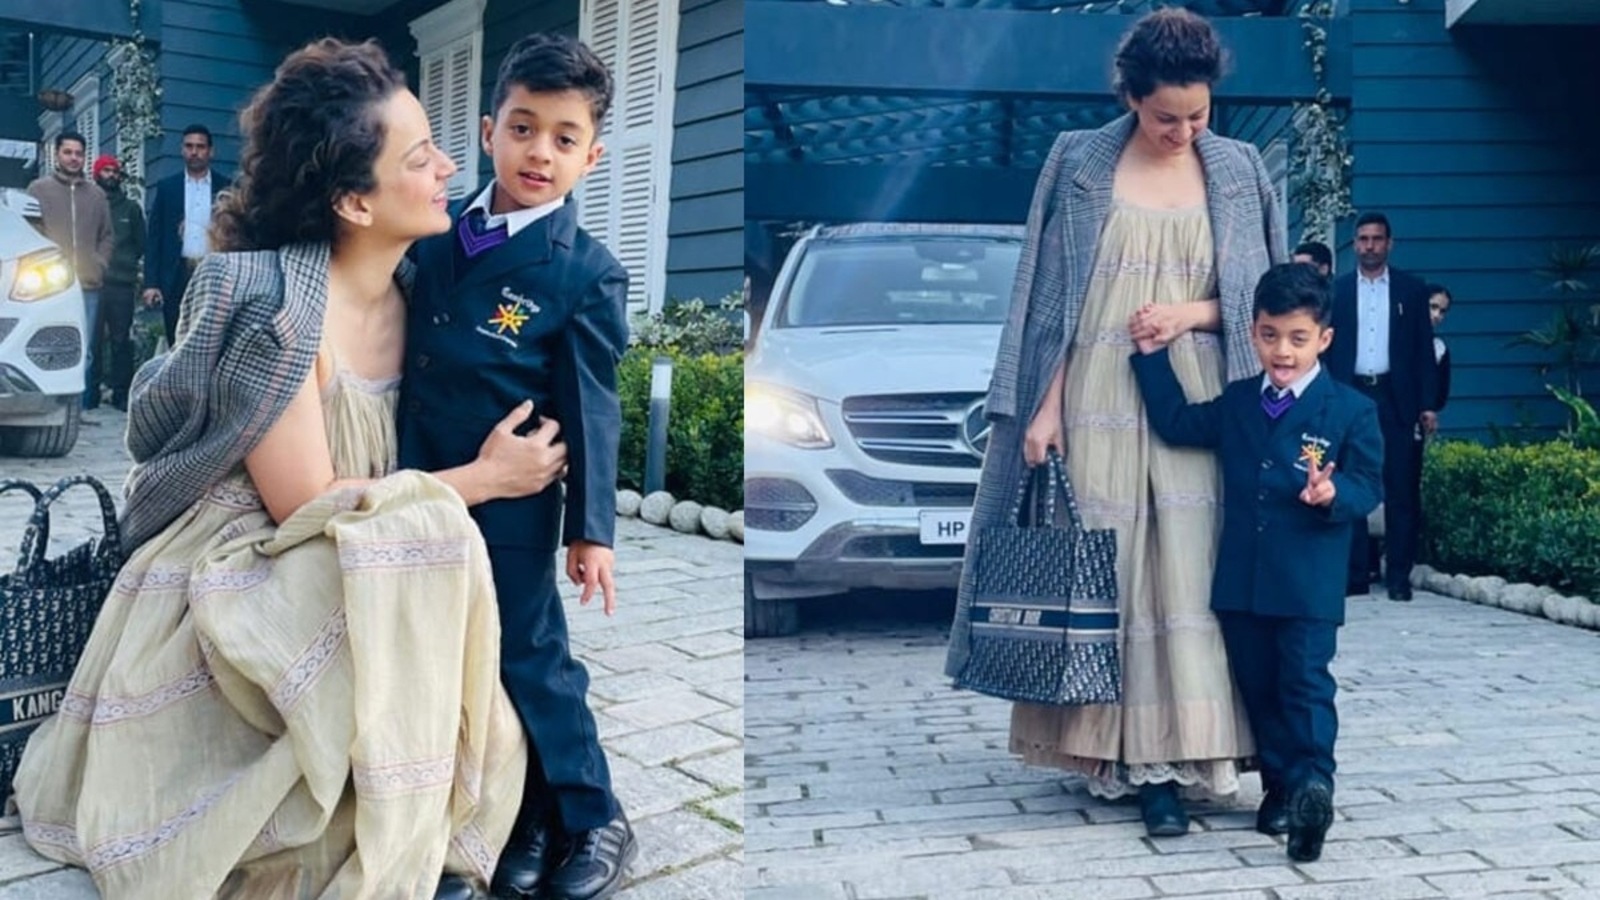 Kangana Ranaut gives nephew a hug as she sees him off on his first day of school in Manali